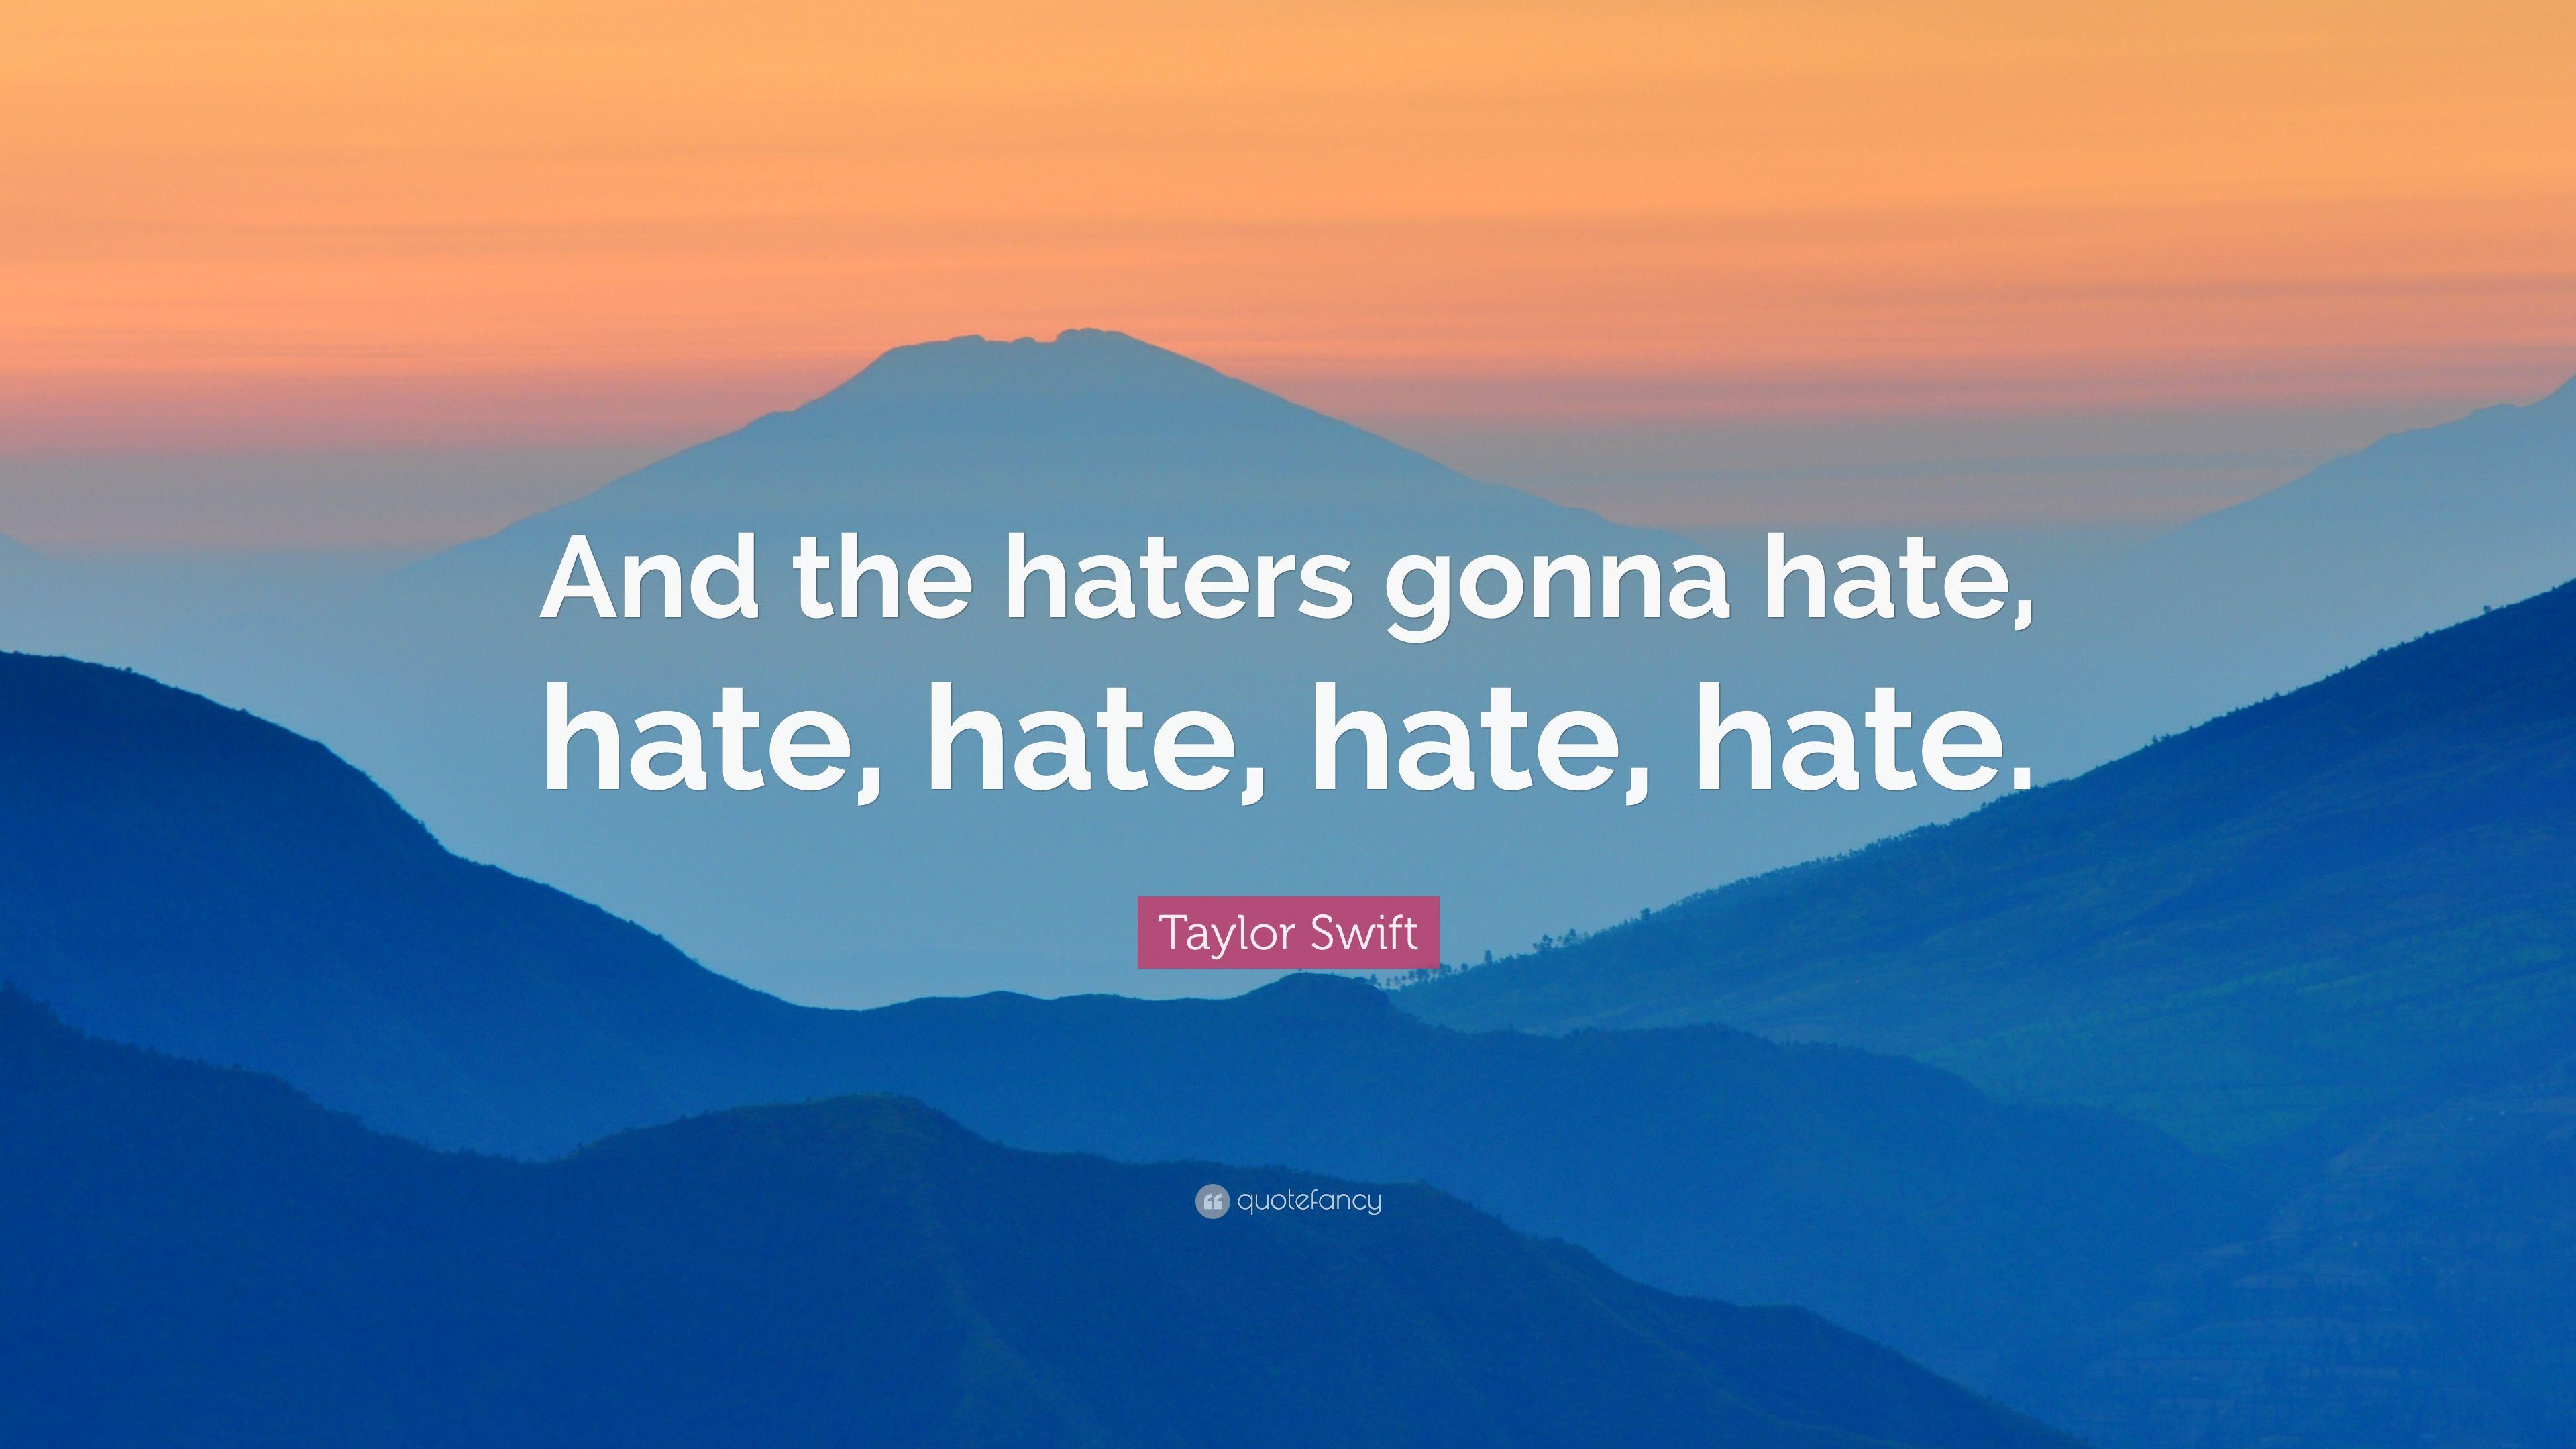 Taylor Swift Quote: “And the haters gonna hate, hate, hate, hate